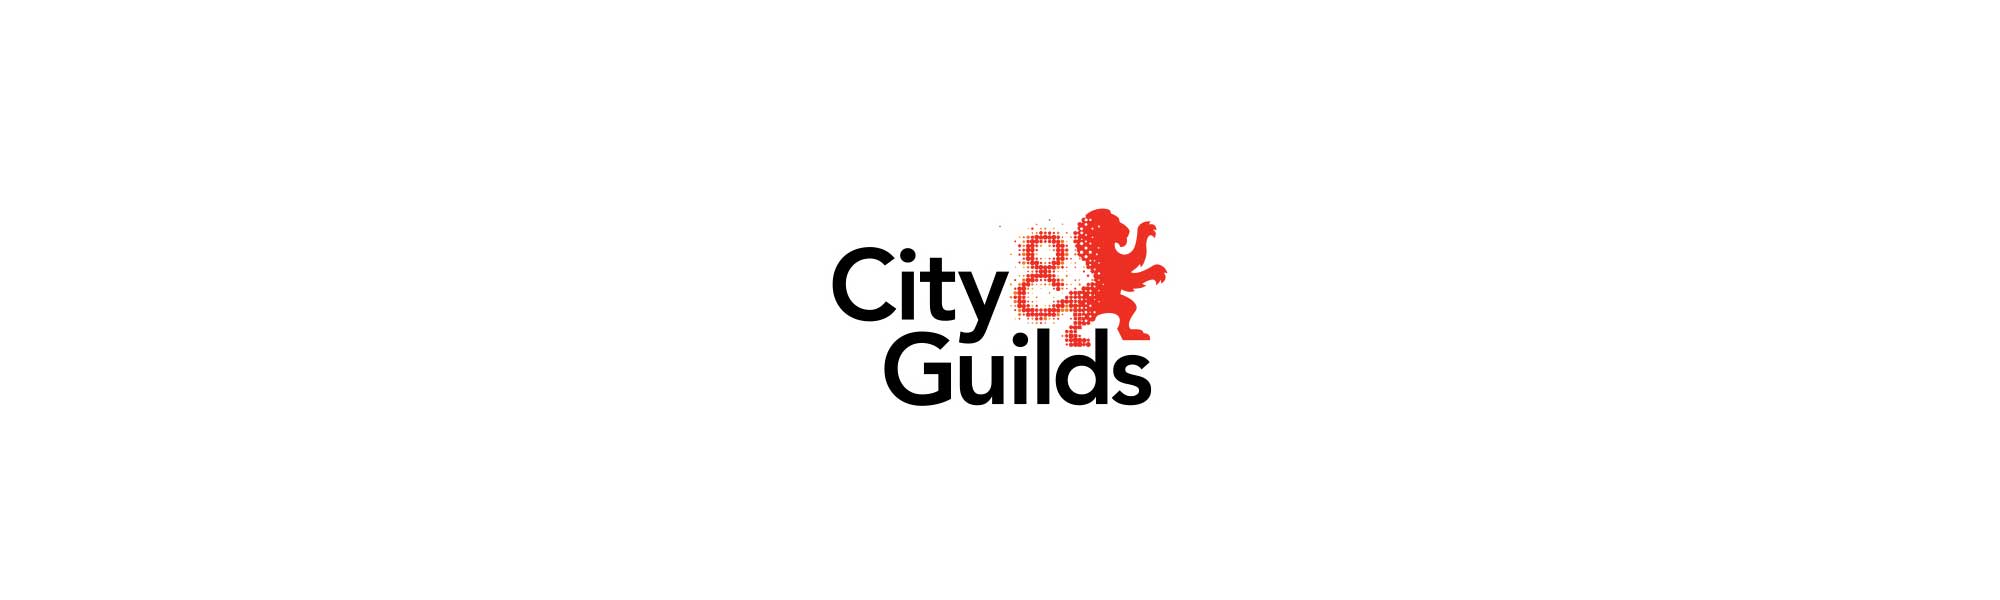 Avery partners with City and Guilds